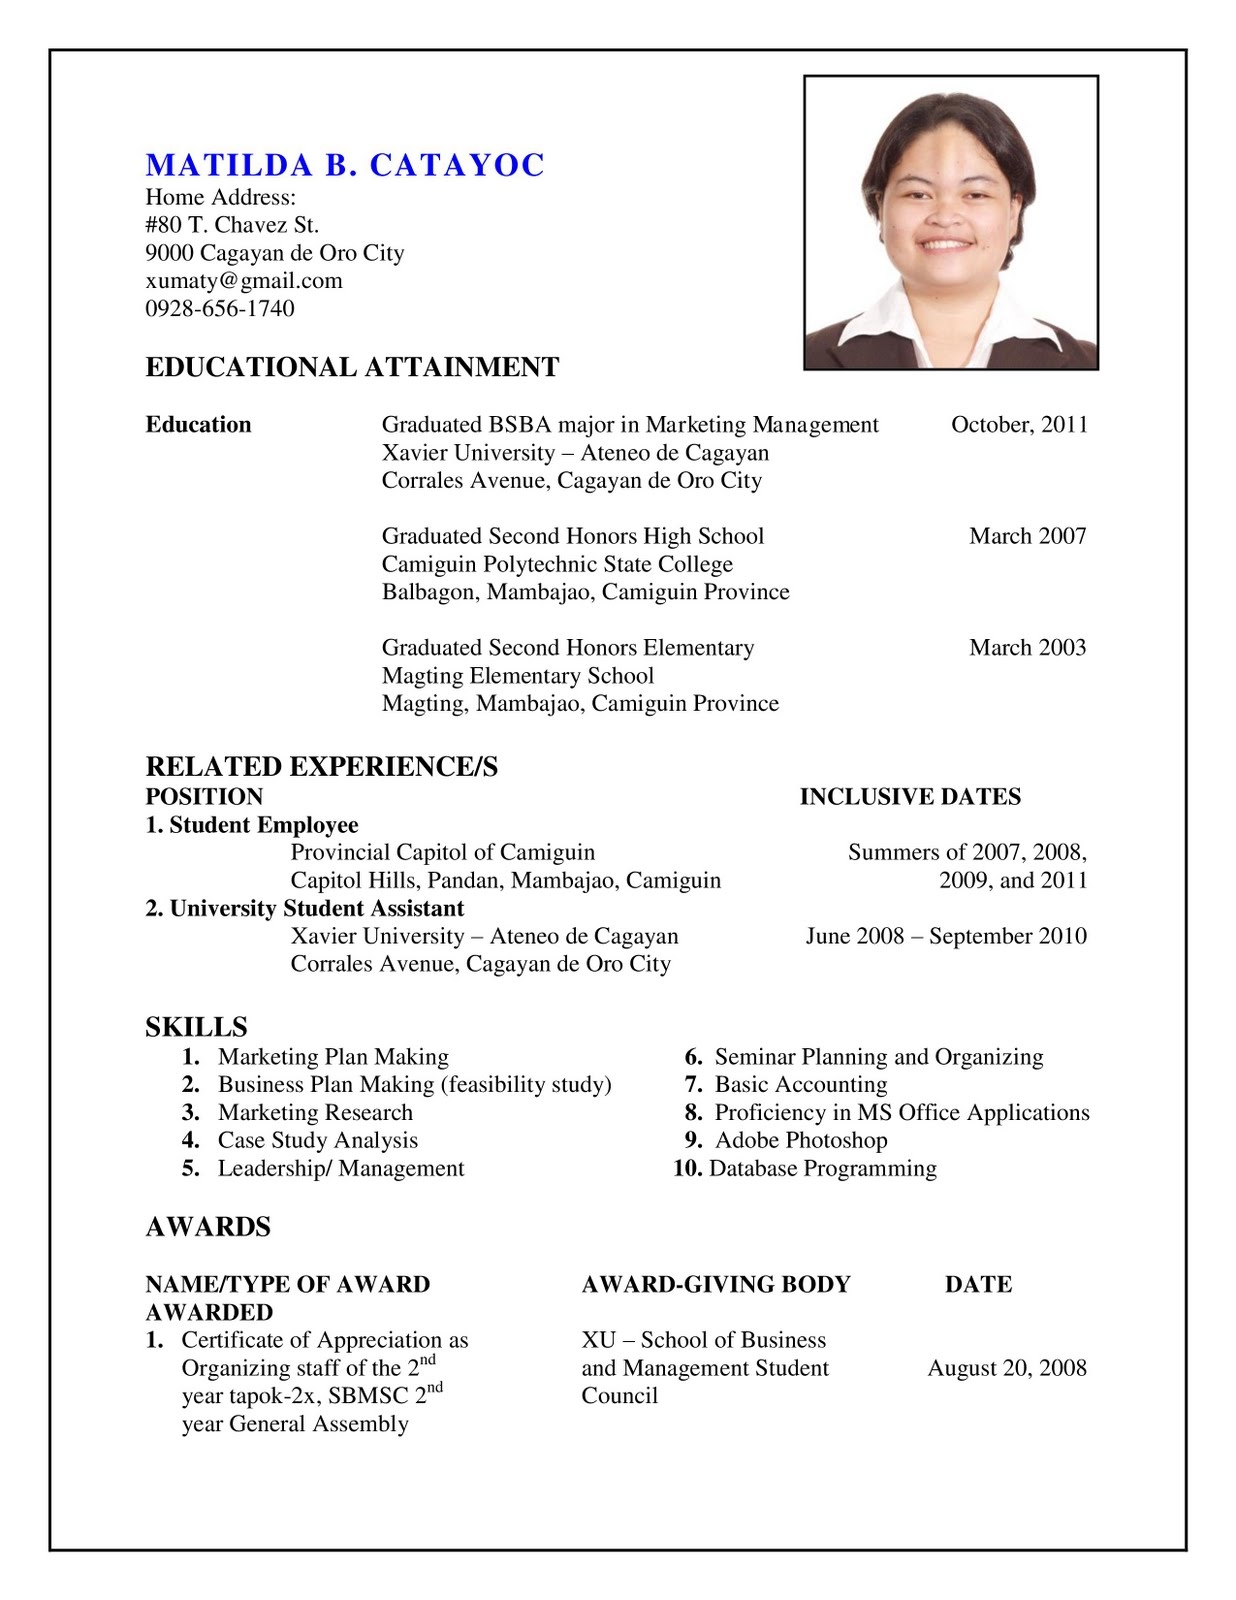 How To Do A Resume Easy How To Make A Resuma Resume For Free And Download Template How To Make An Resume how to do a resume|wikiresume.com